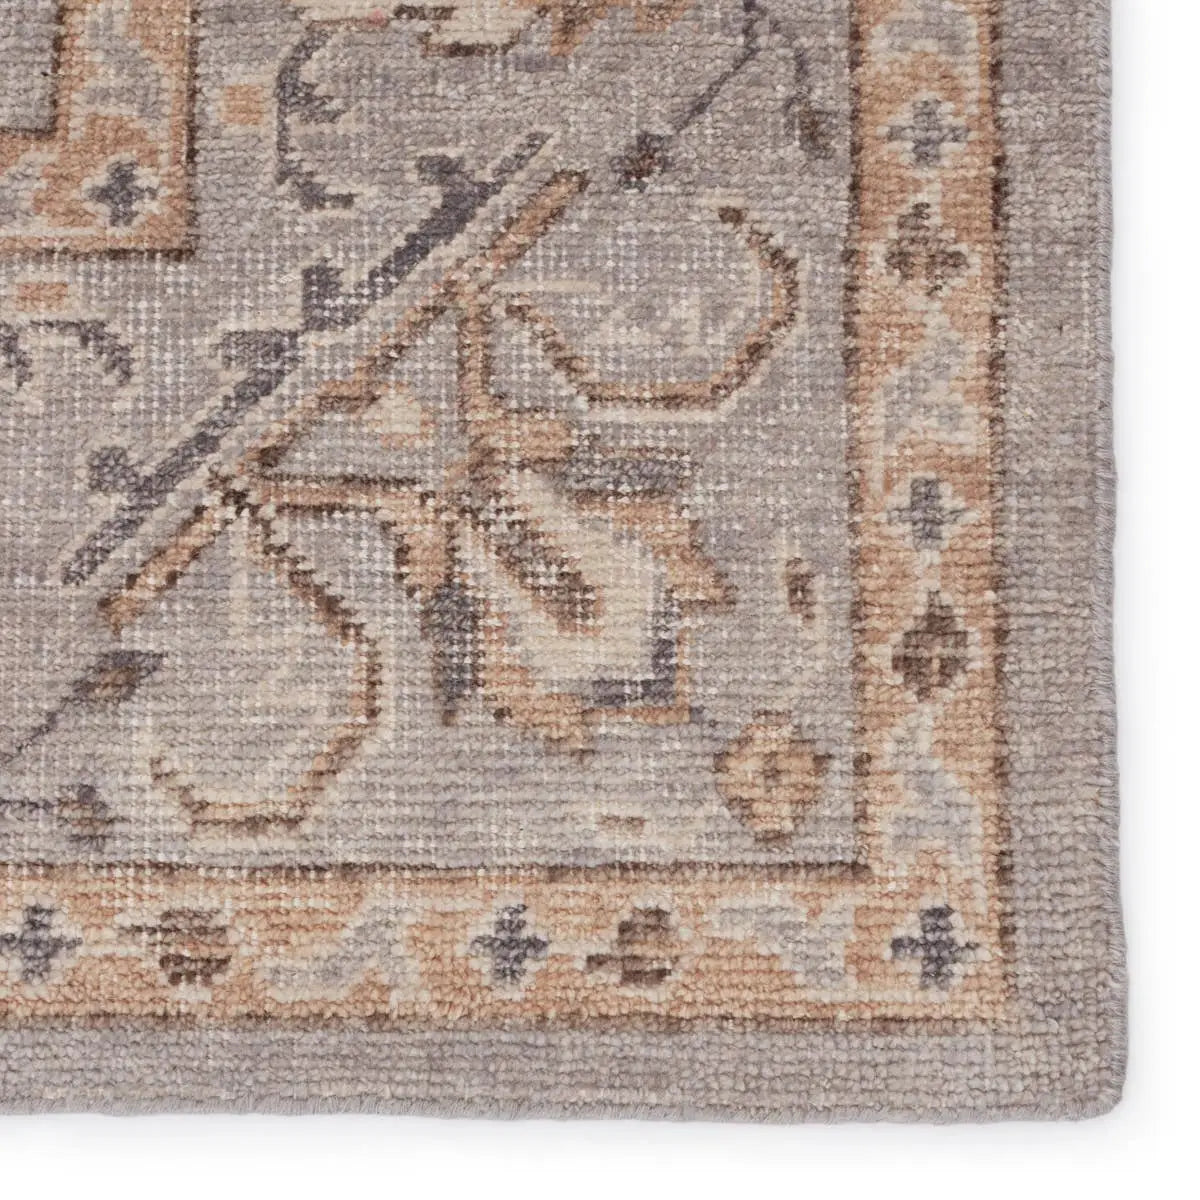 The Revolution Wyndham rug is inspired by traditional style and beautifully detailed antique textile designs. The hand-knotted Wyndham area rug showcases a classic motif in neutral tones of gray and warm tan. Amethyst Home provides interior design services, furniture, rugs, and lighting in the New York metro area.